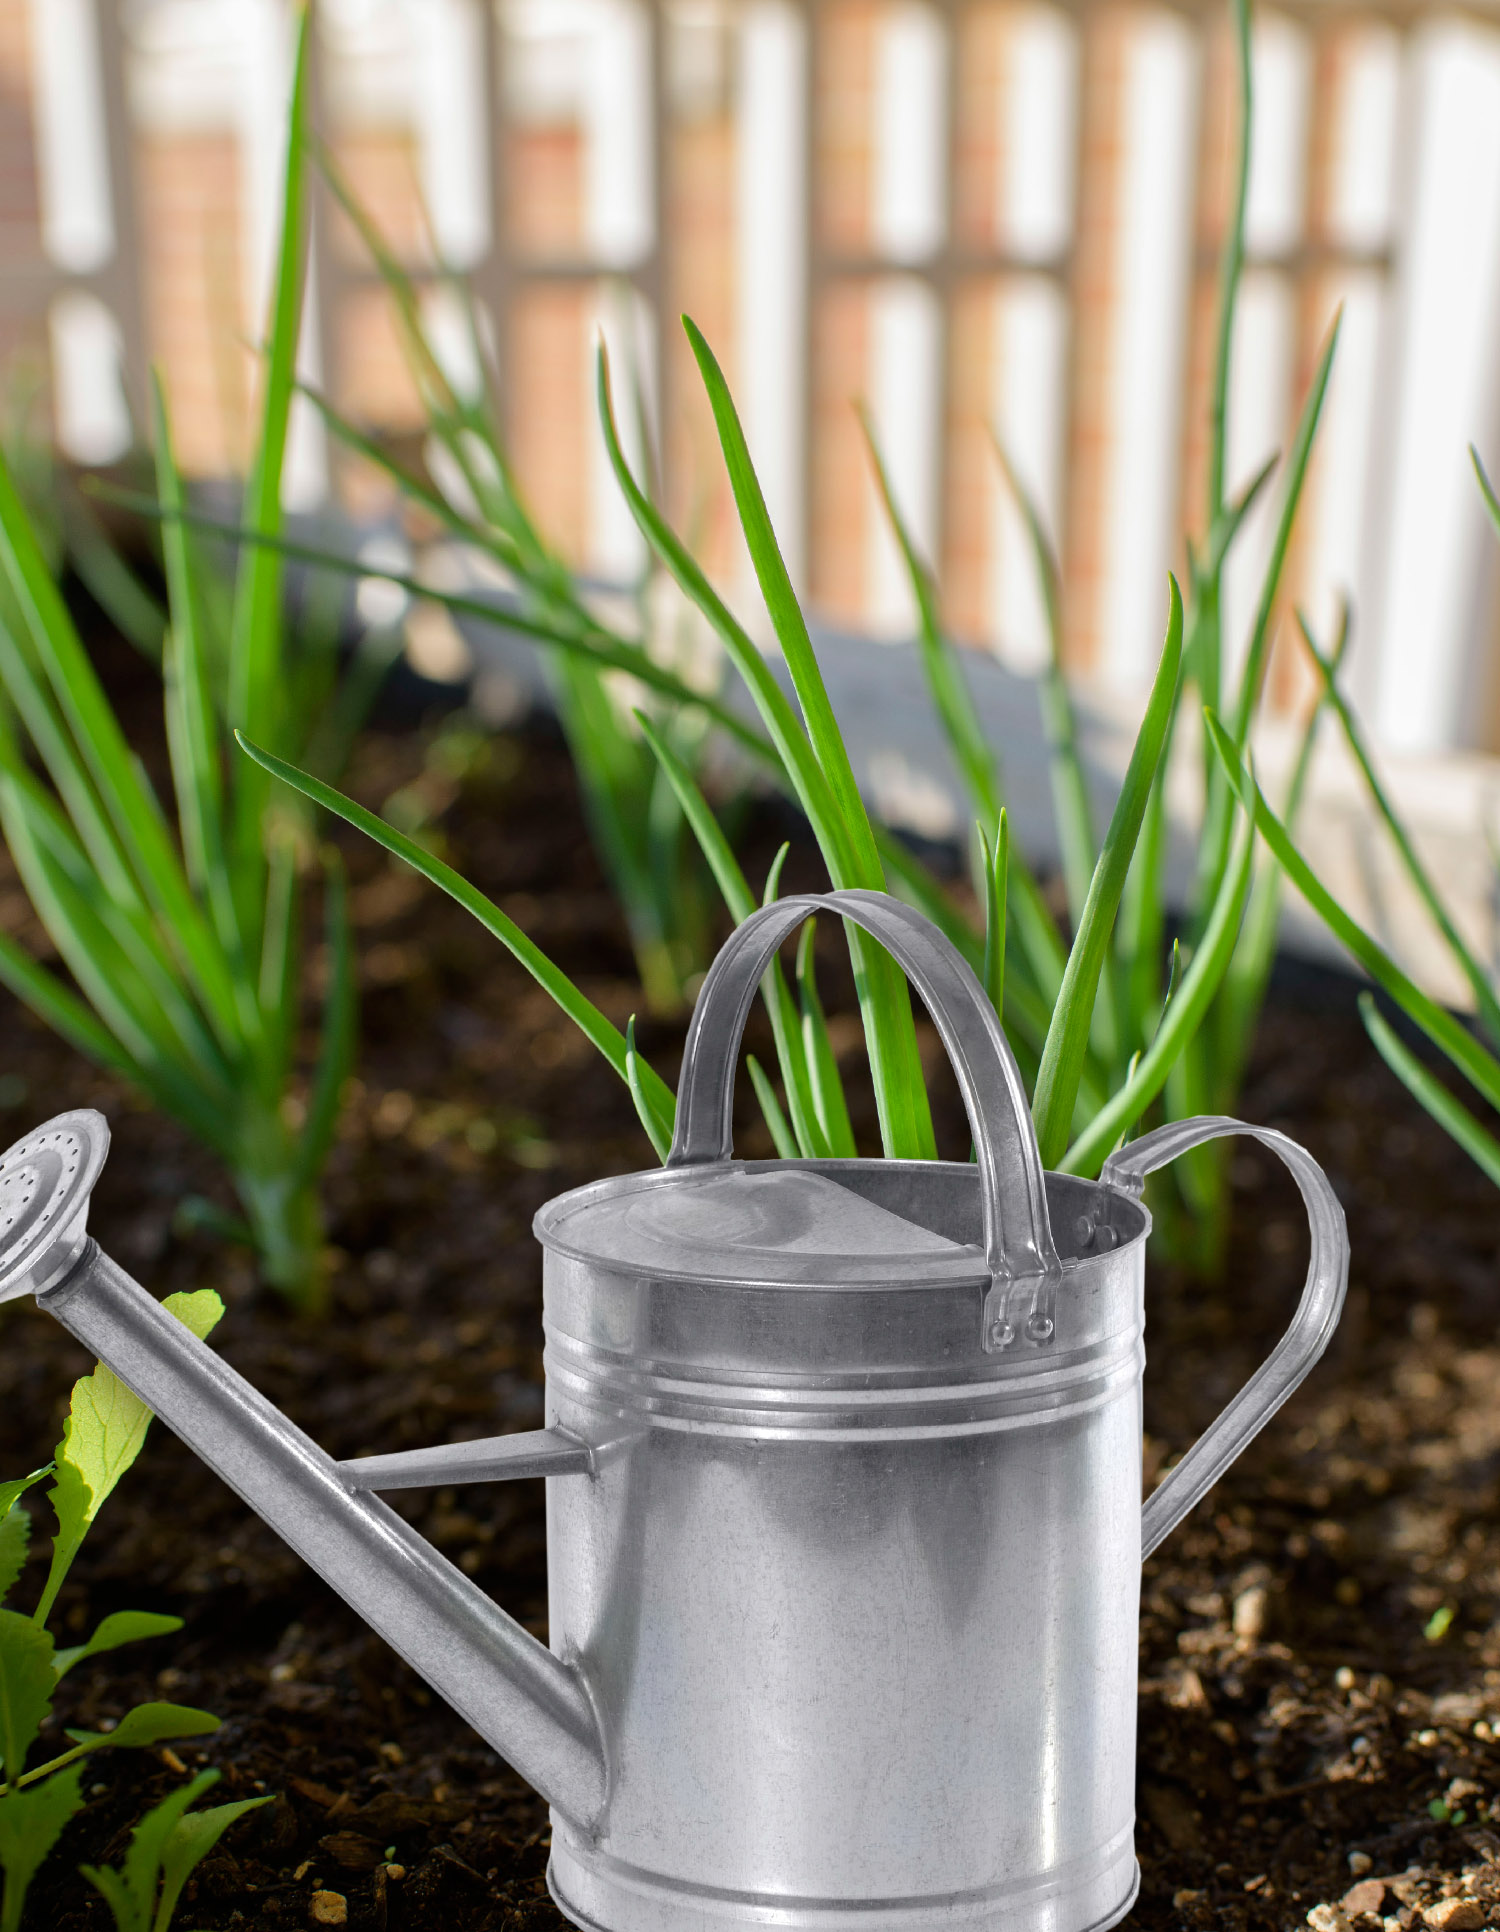 A metal watering can sits among green onions on a salad table.